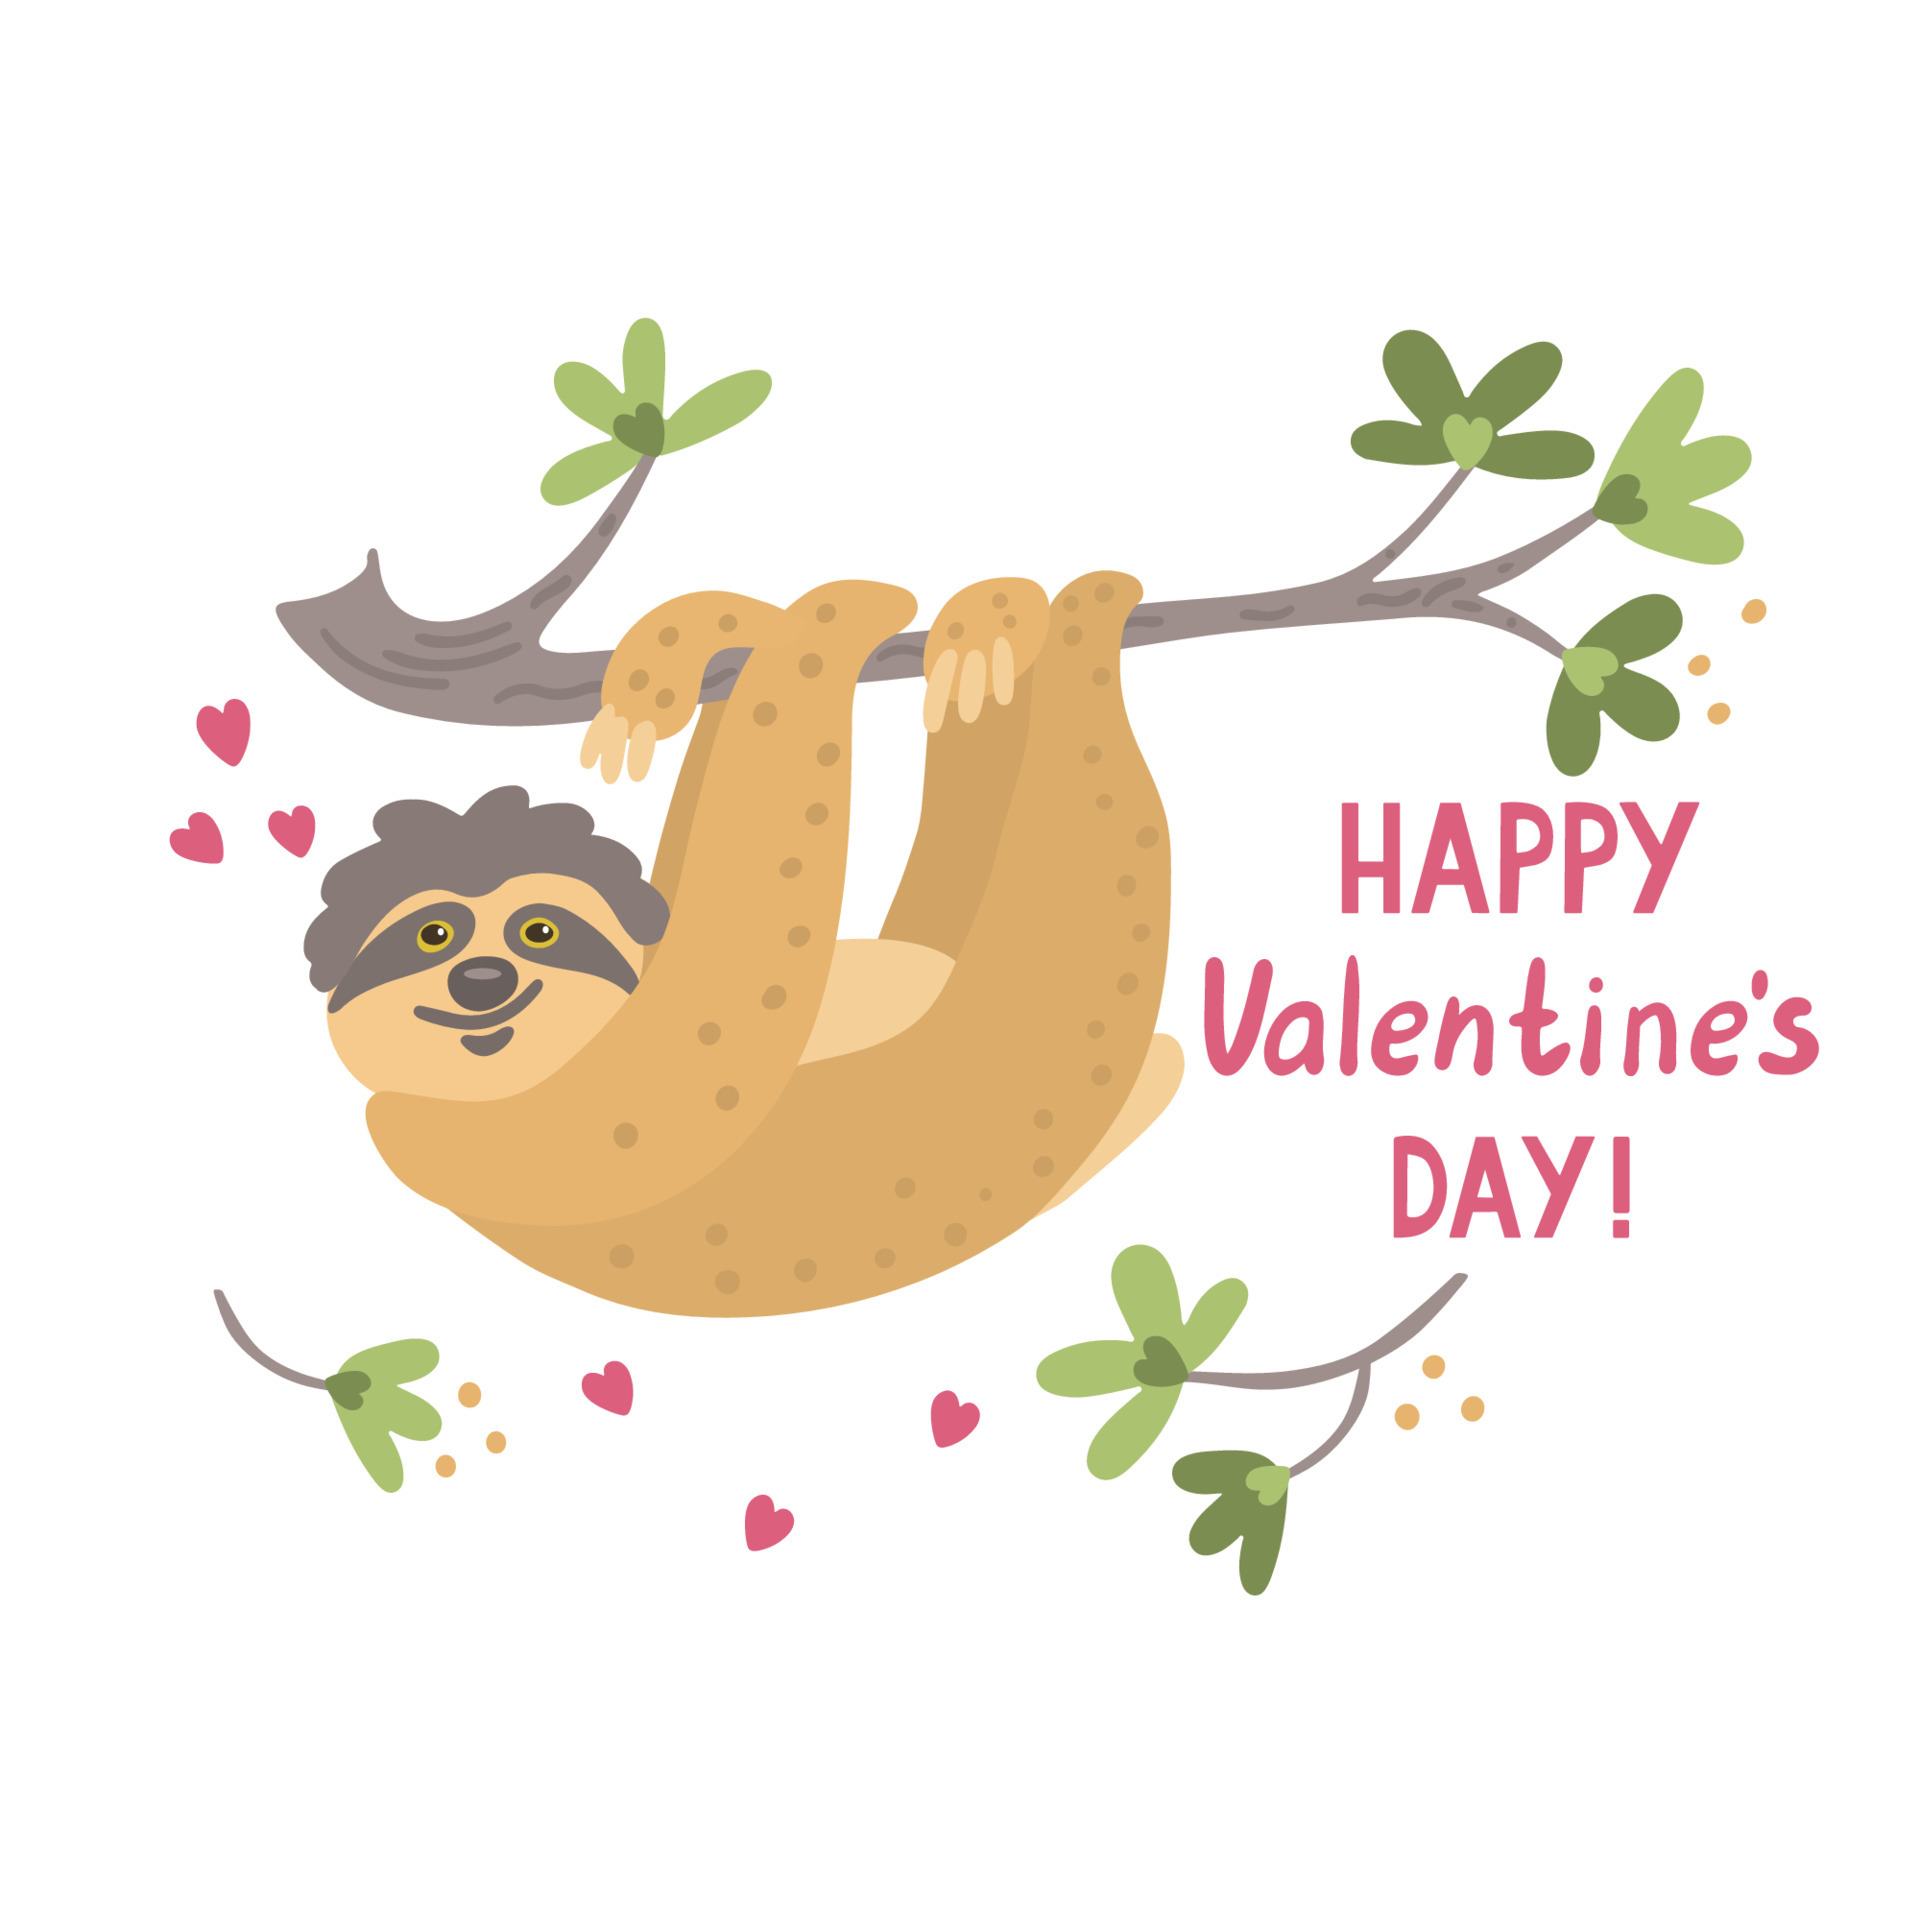 Happy Valentines Day card with cute sloth